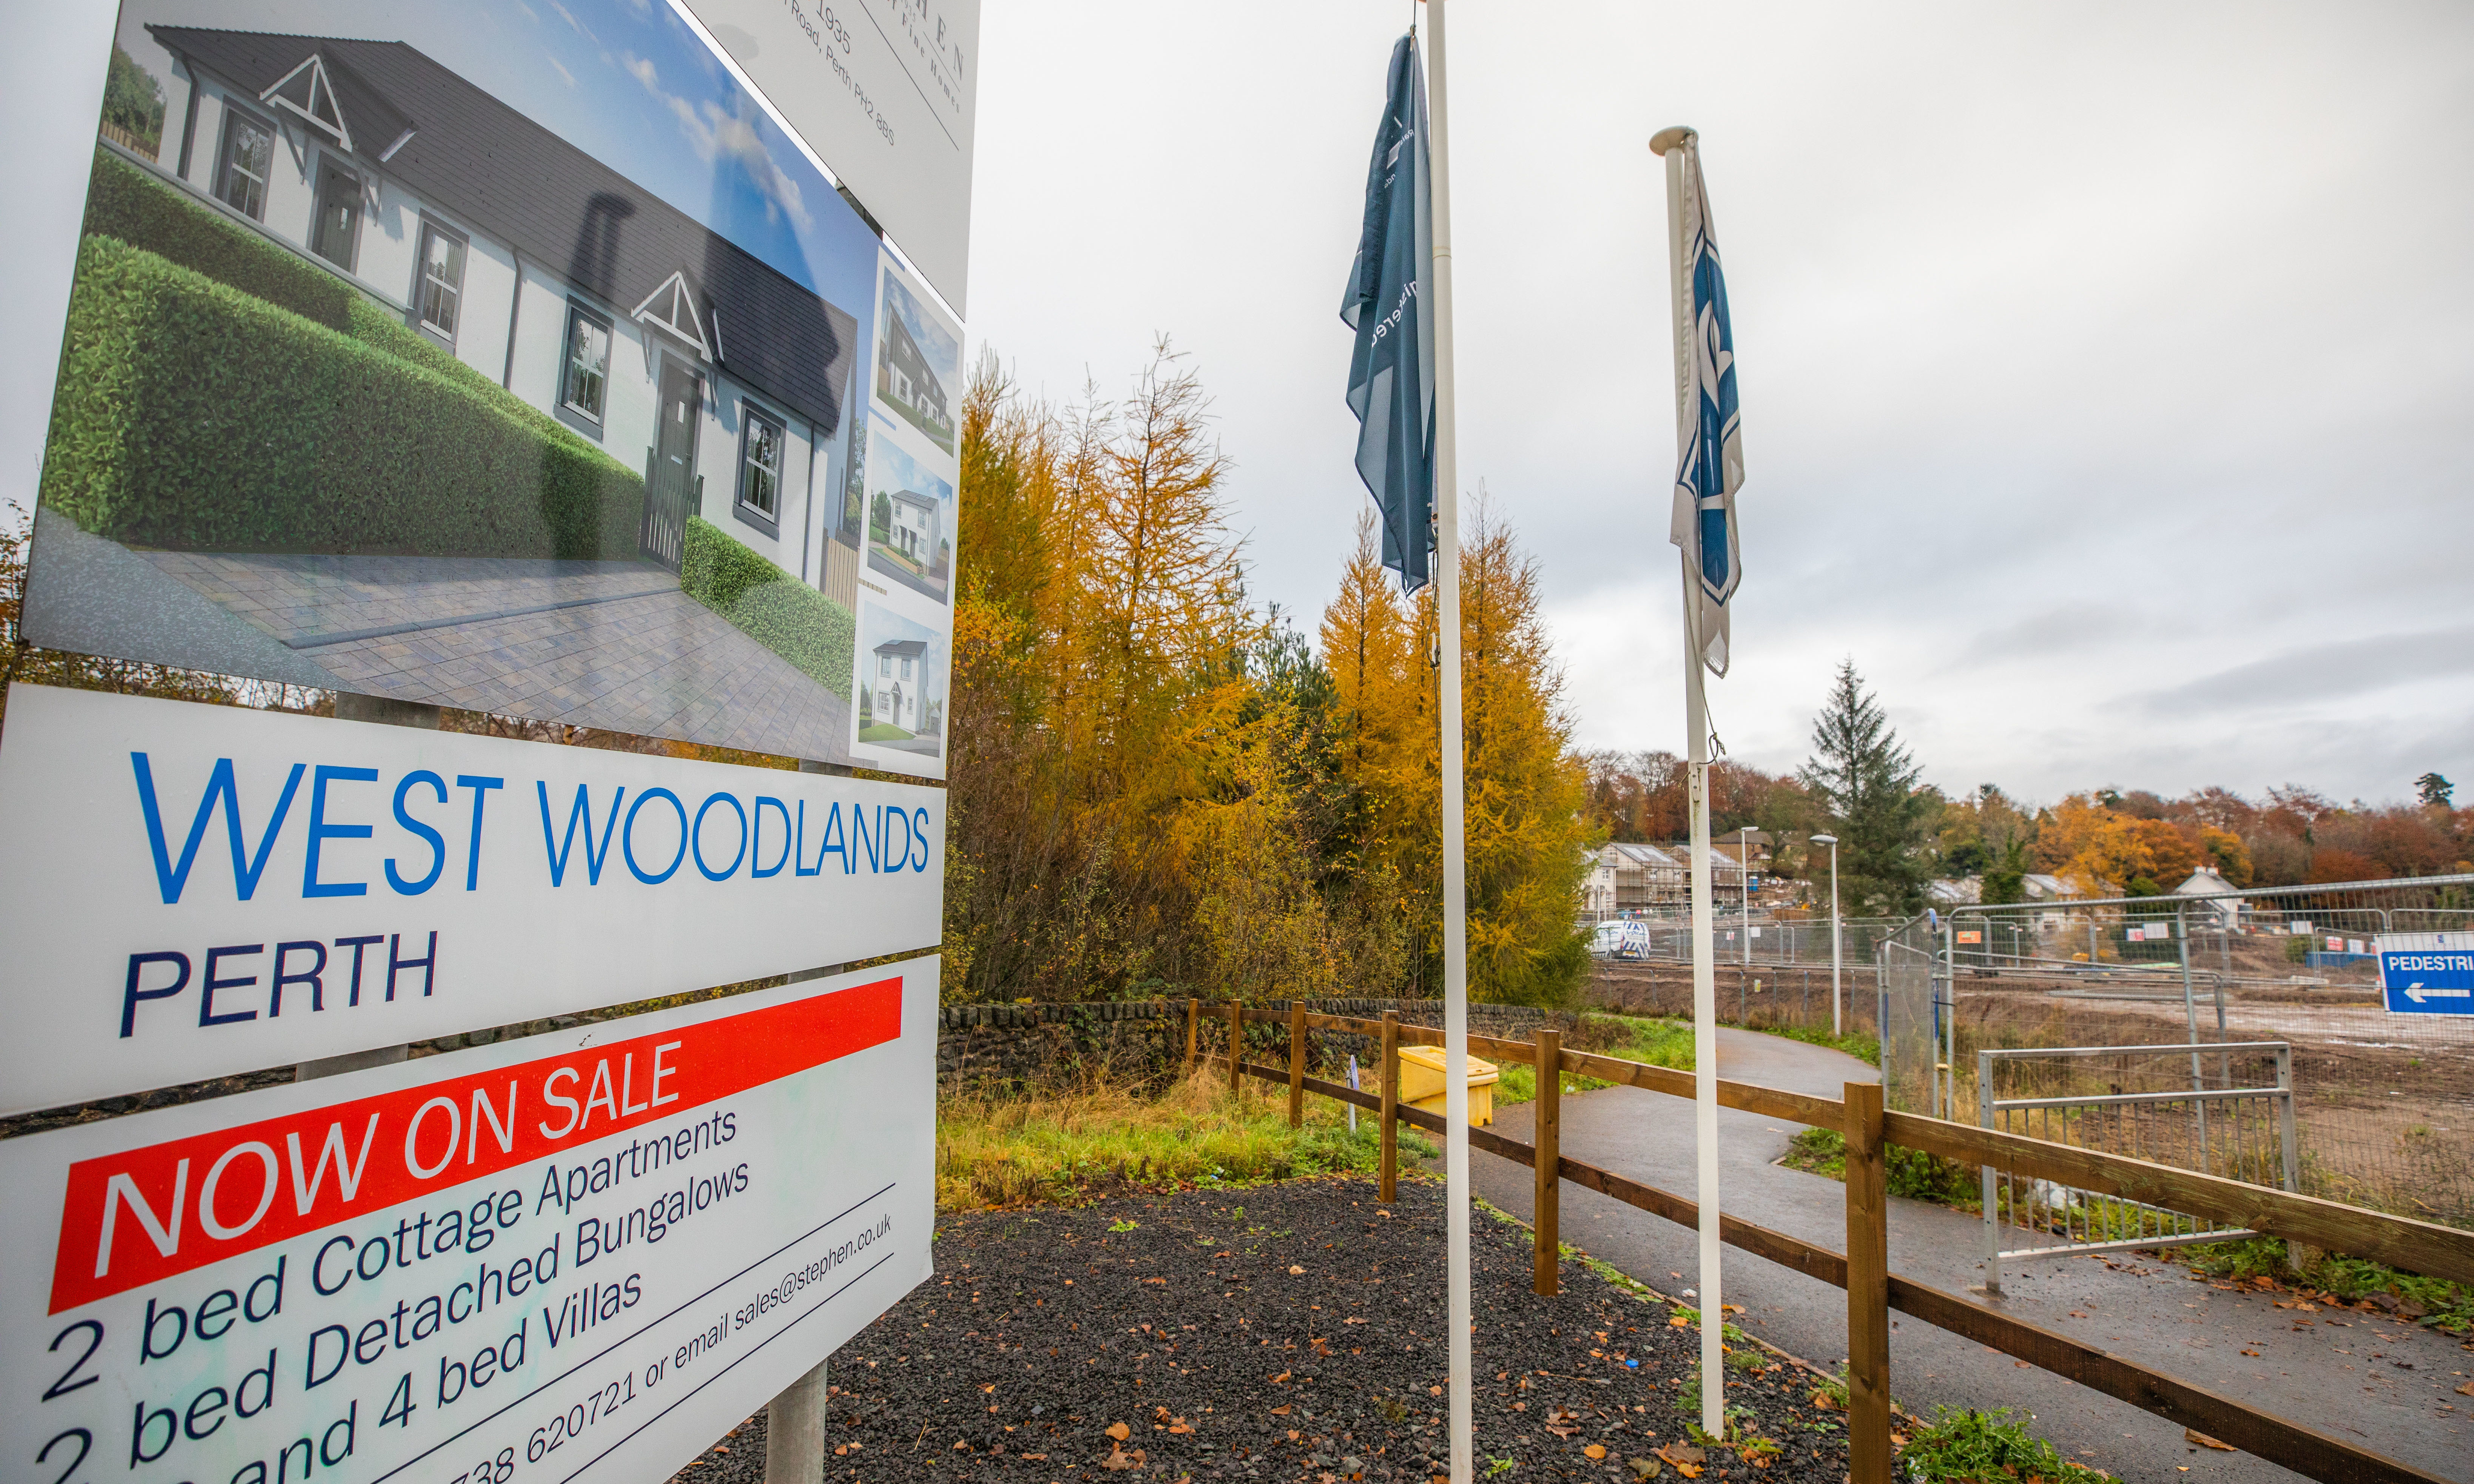 The West Woodlands site off Glasgow Road, Perth